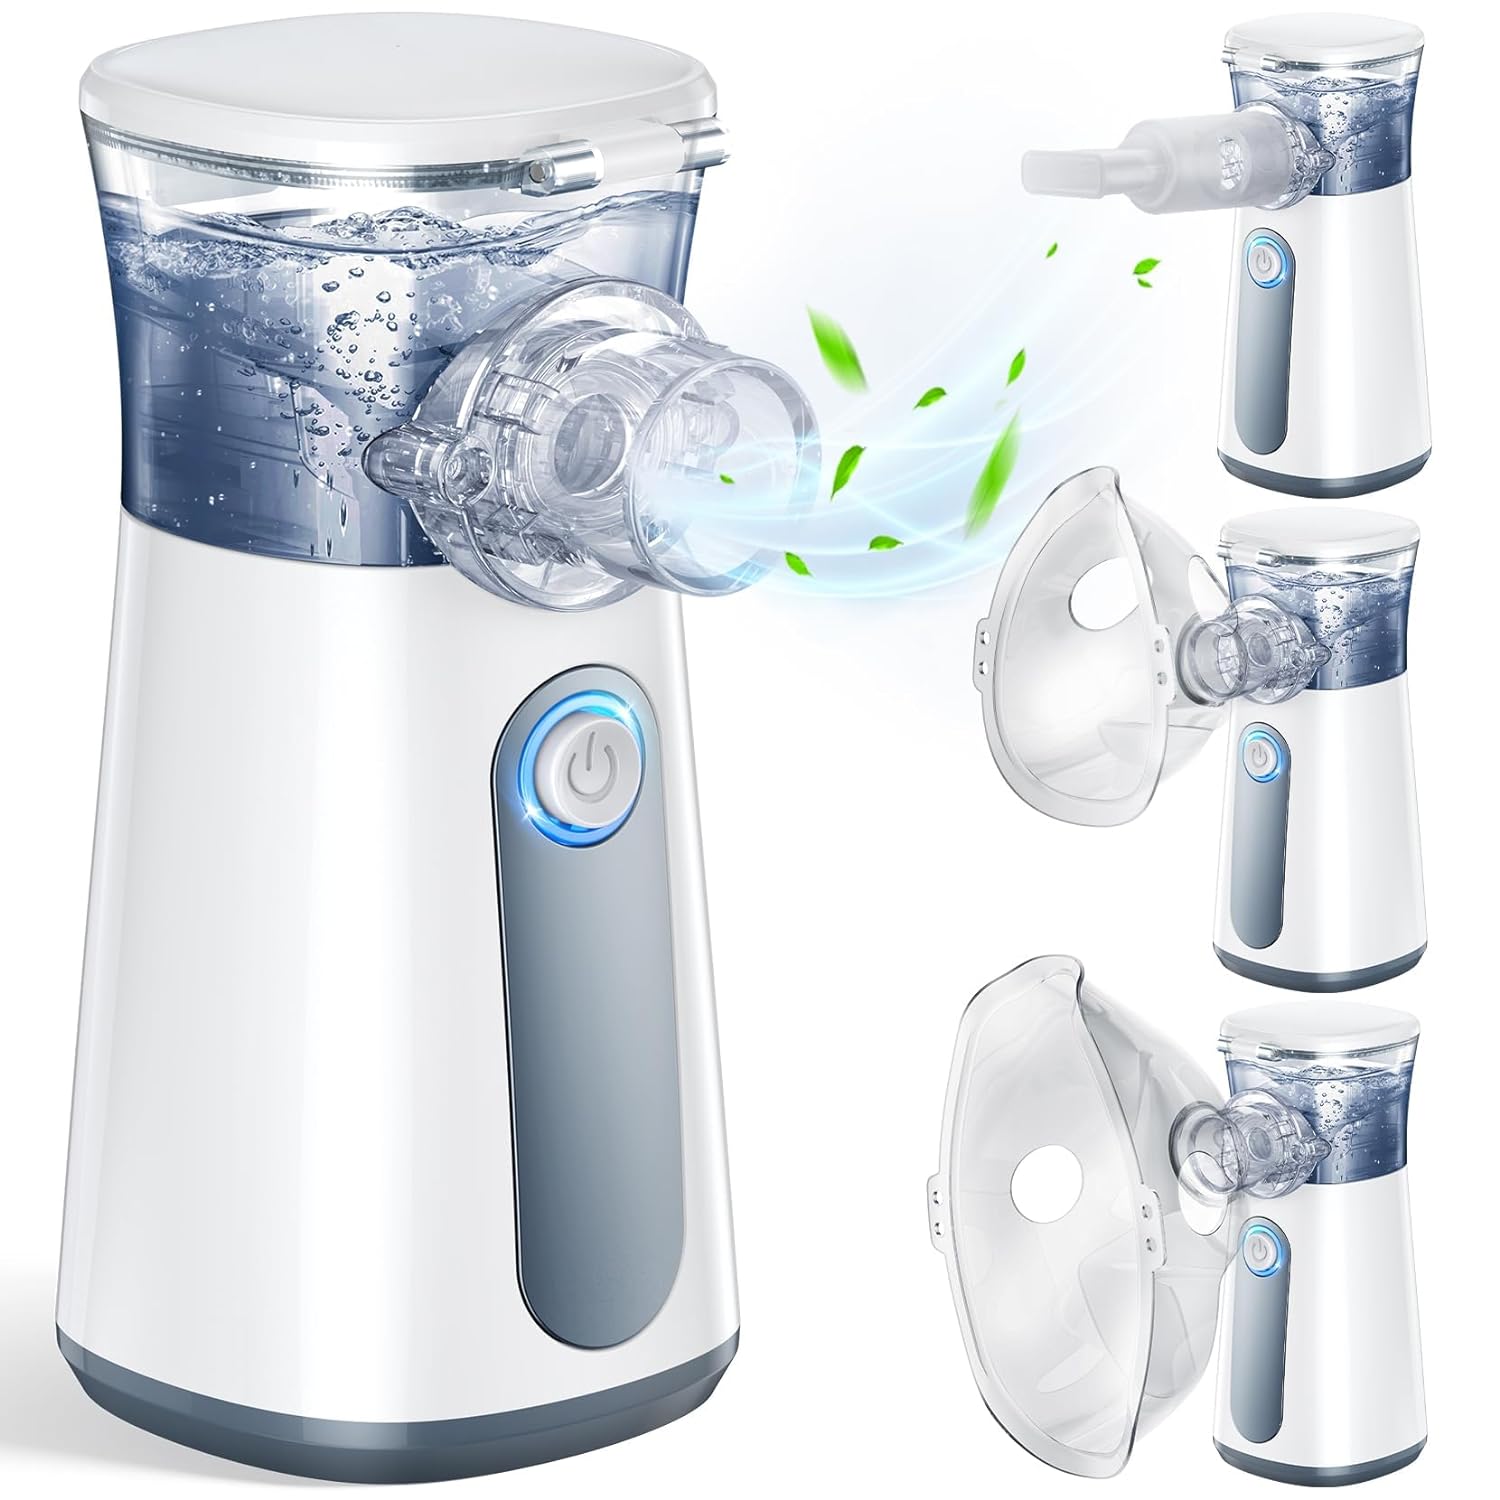 Read more about the article Portable Nebulizer Machine for Kids and Adults: The Nebulizer Handheld steam Inhaler, 3 Masks for ONLY $38.99 (Was $59.99)